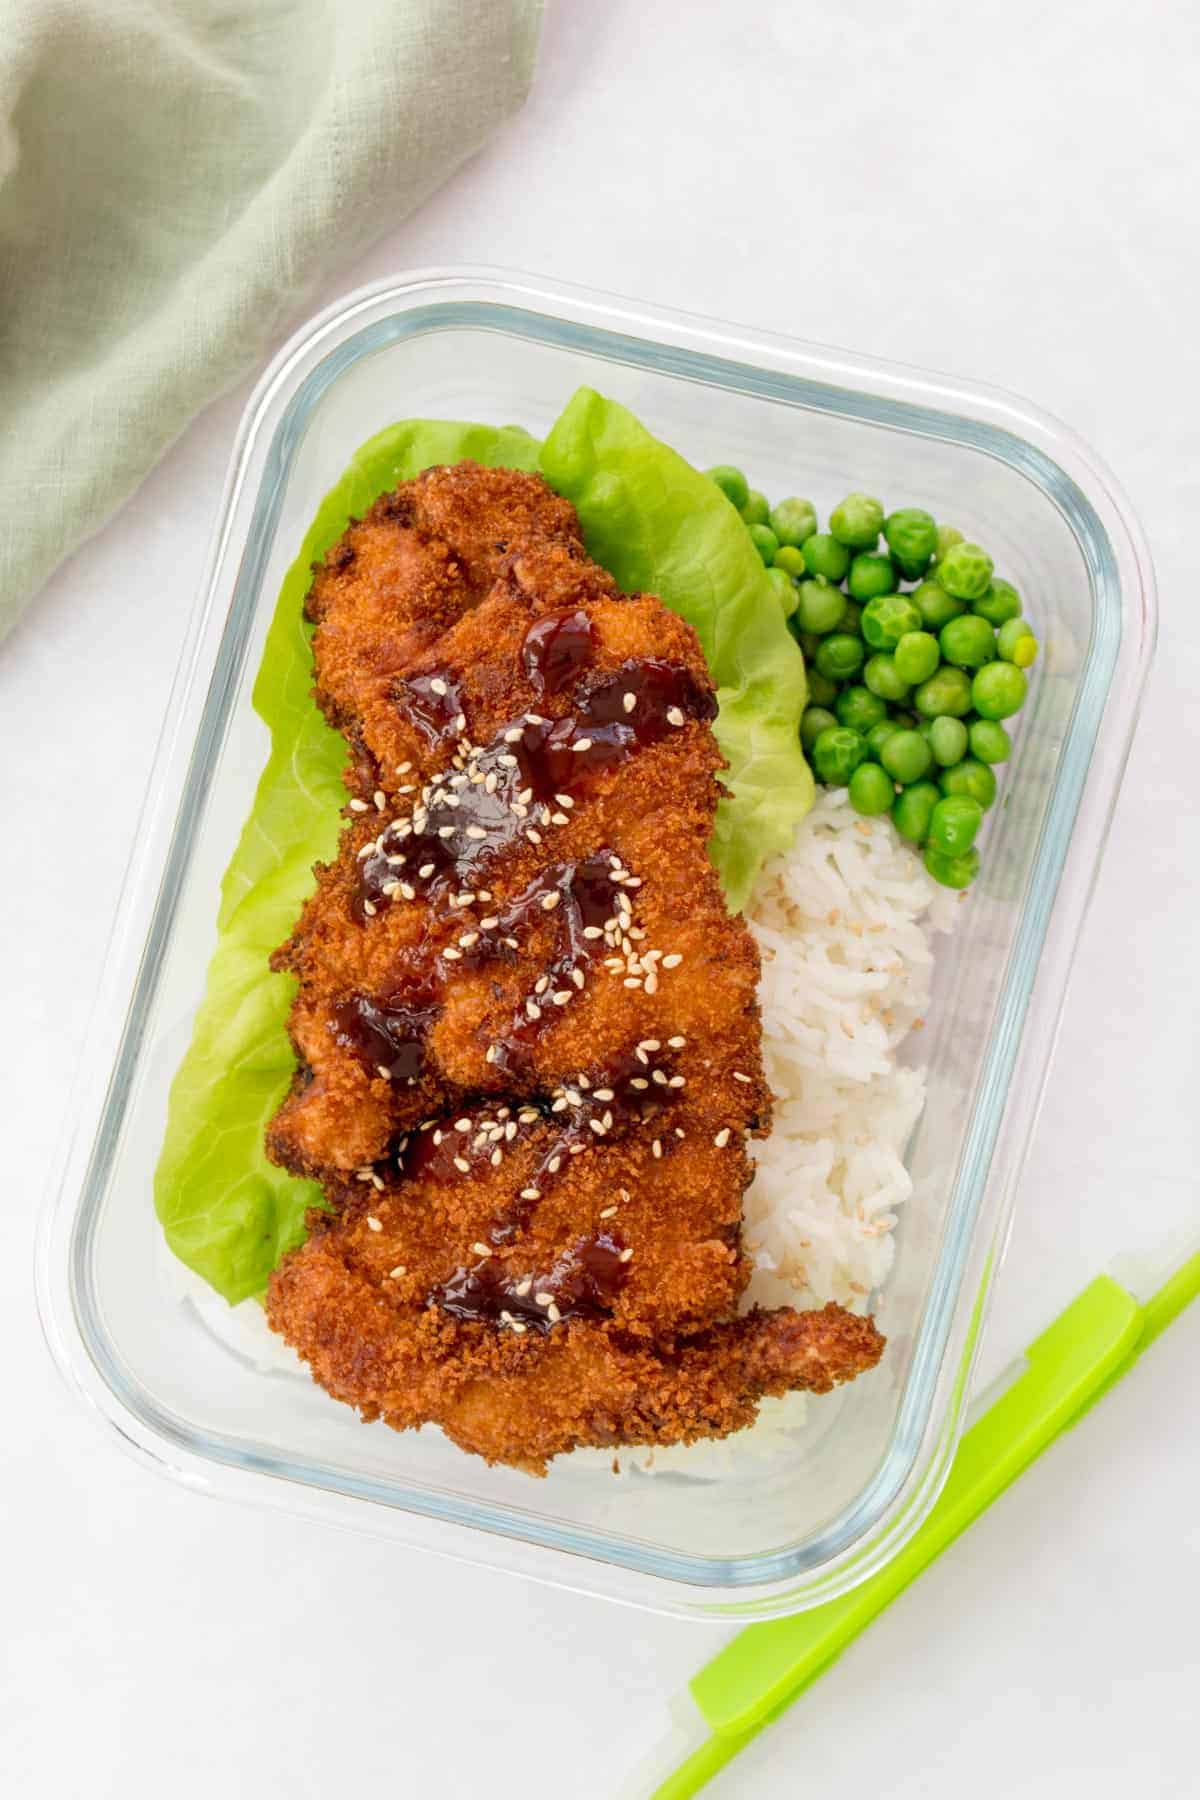 Chicken katsu in a bento box with rice, peas, and lettuce.